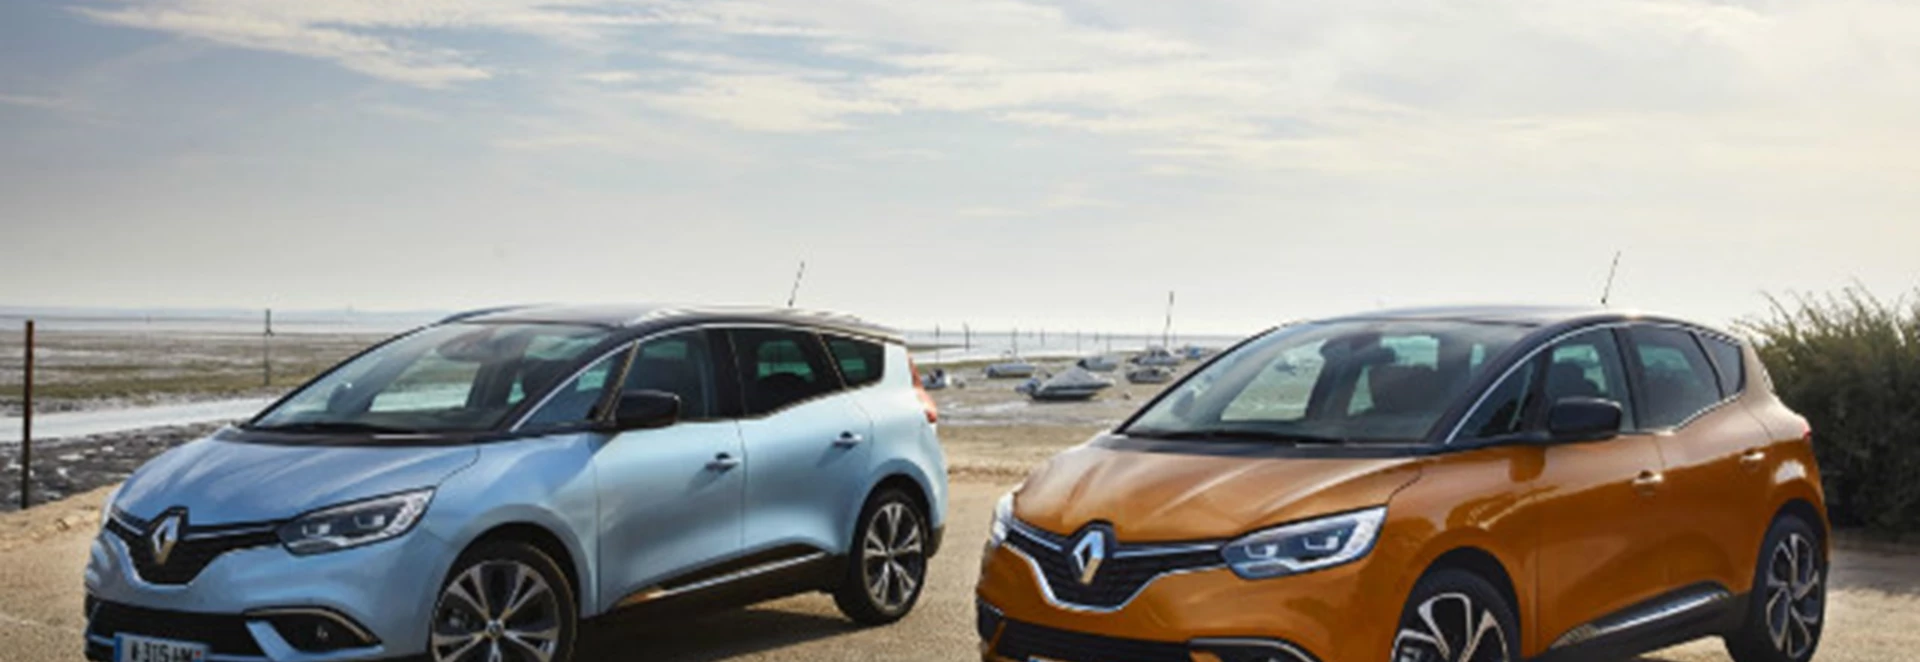 2017 Renault Scenic and Grand Scenic Pricing Confirmed